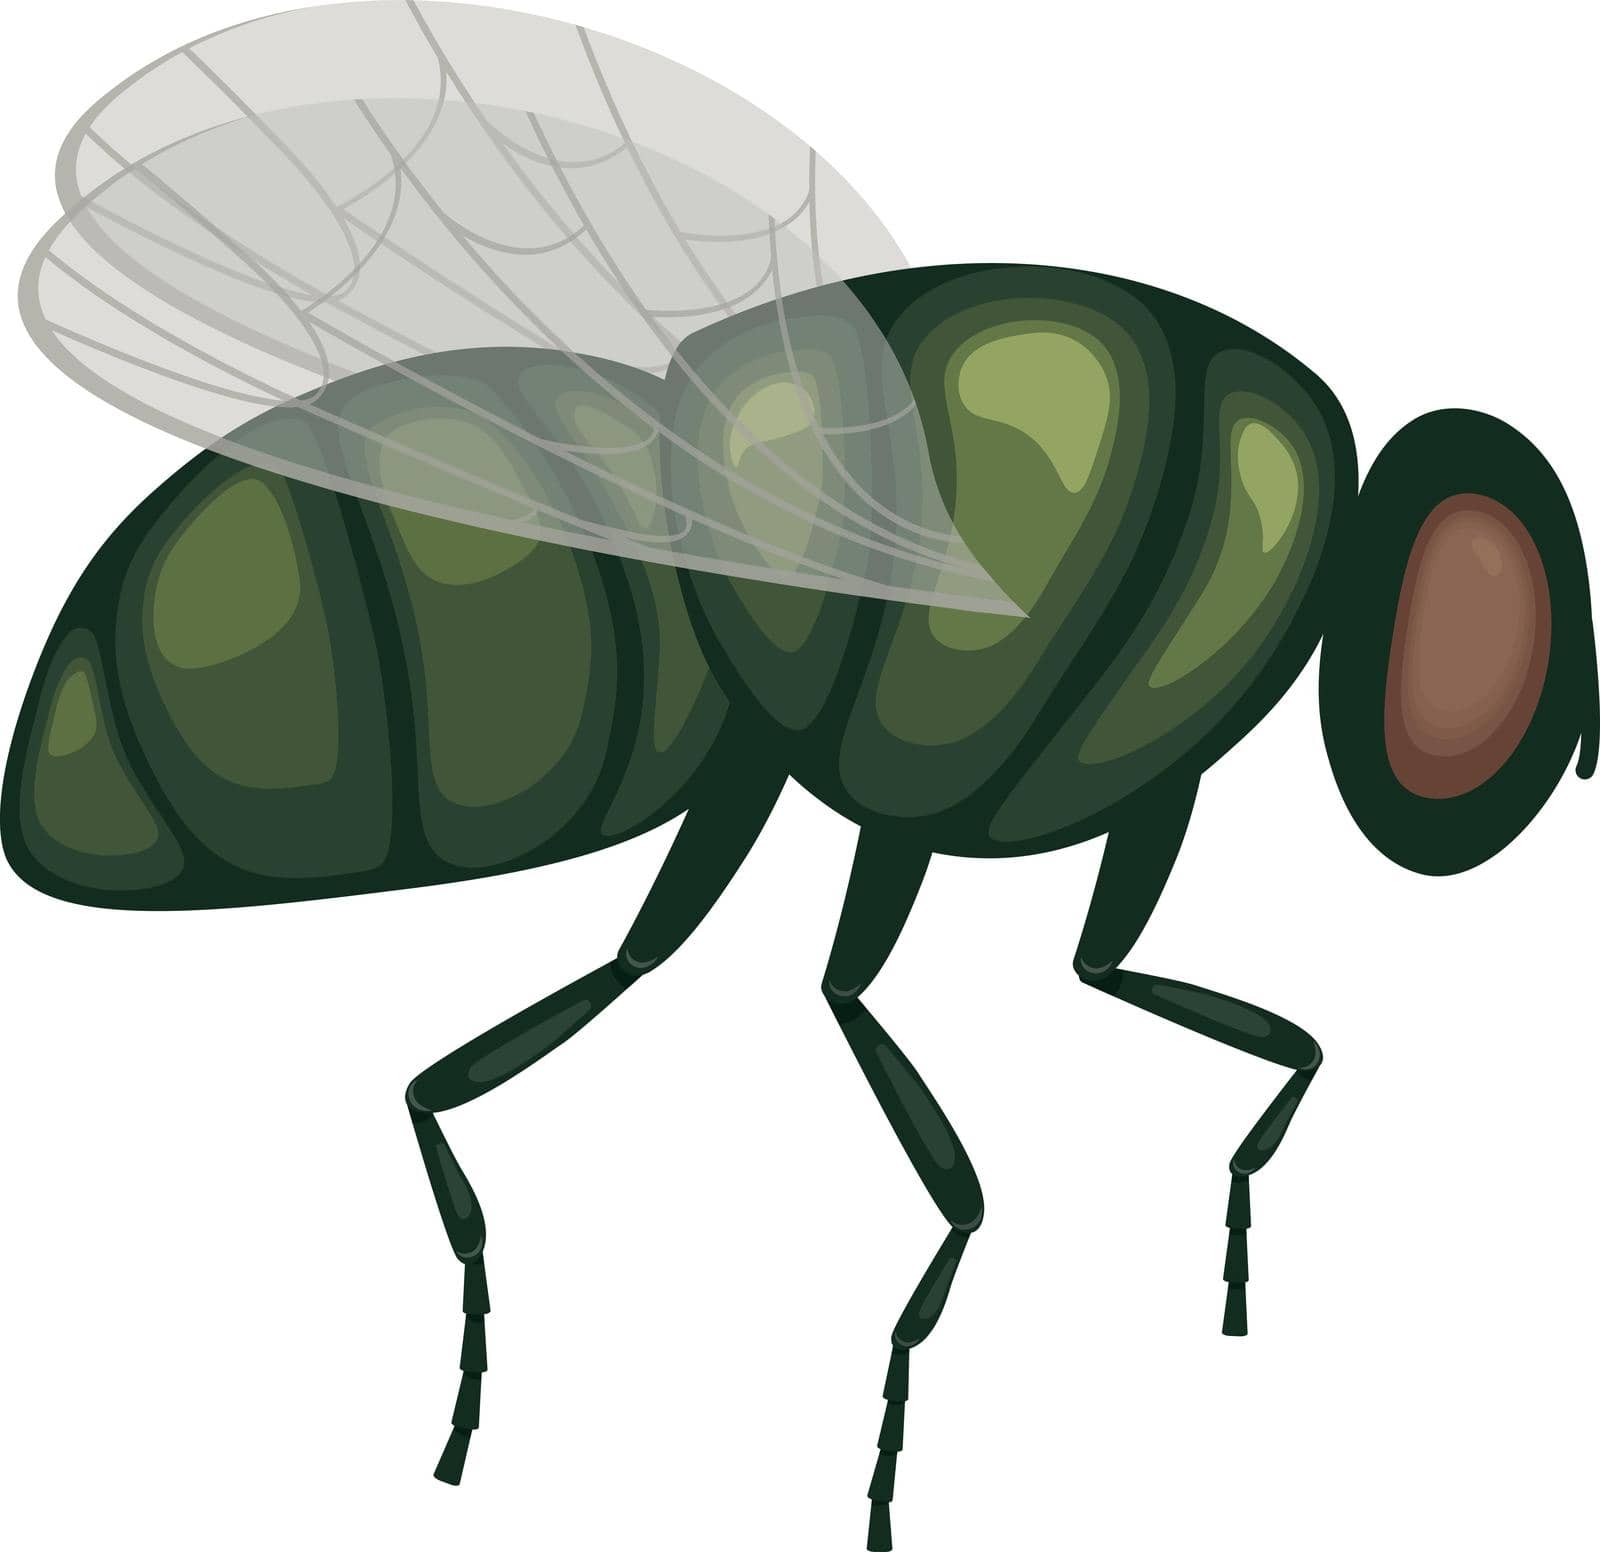 A green fly in flight .A flying insect. Image of a fly, side view. A flying insect. Vector illustration isolated on a white background.